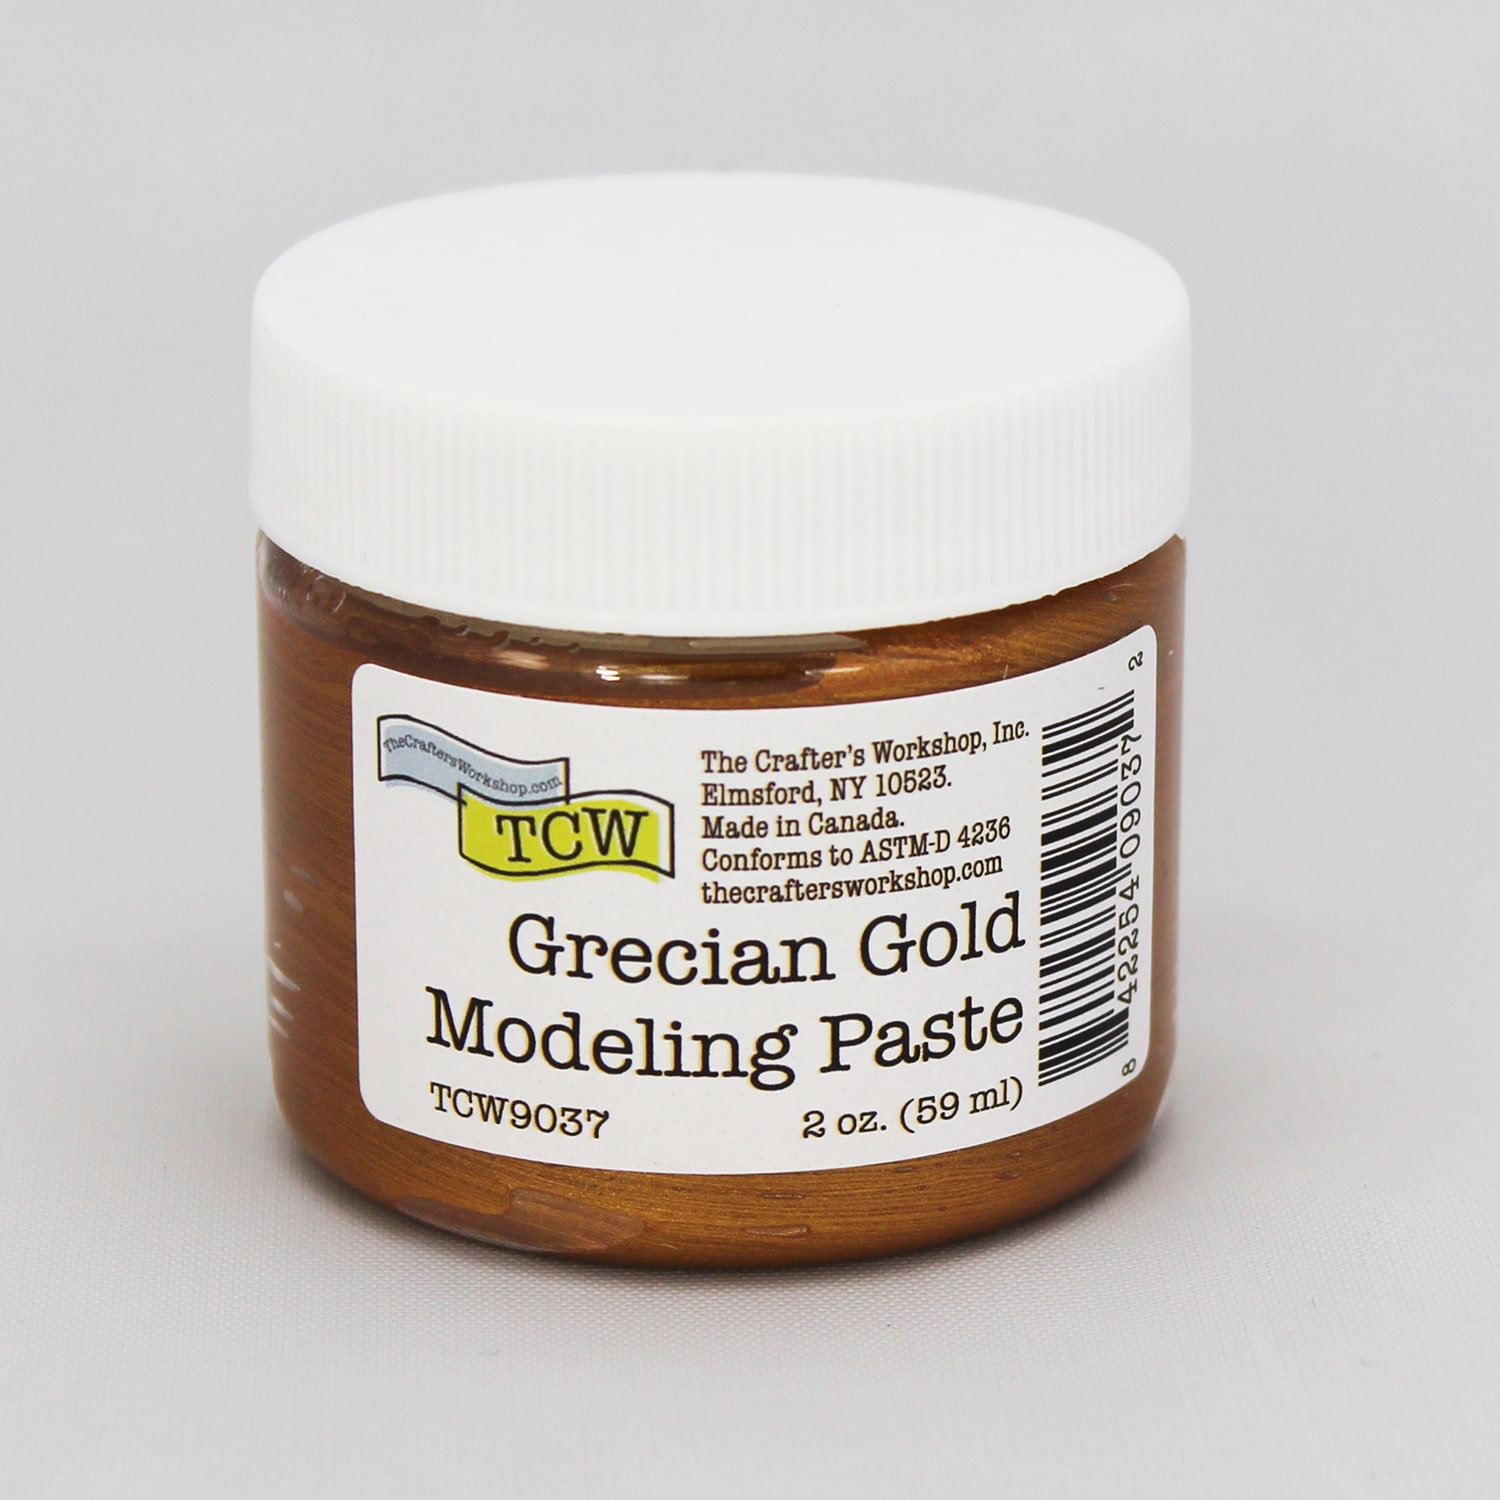 TCW9037 Grecian Gold Modeling Paste 2 oz.  The Crafter's Workshop Stencils  Stamps and Mixed Media Goodies